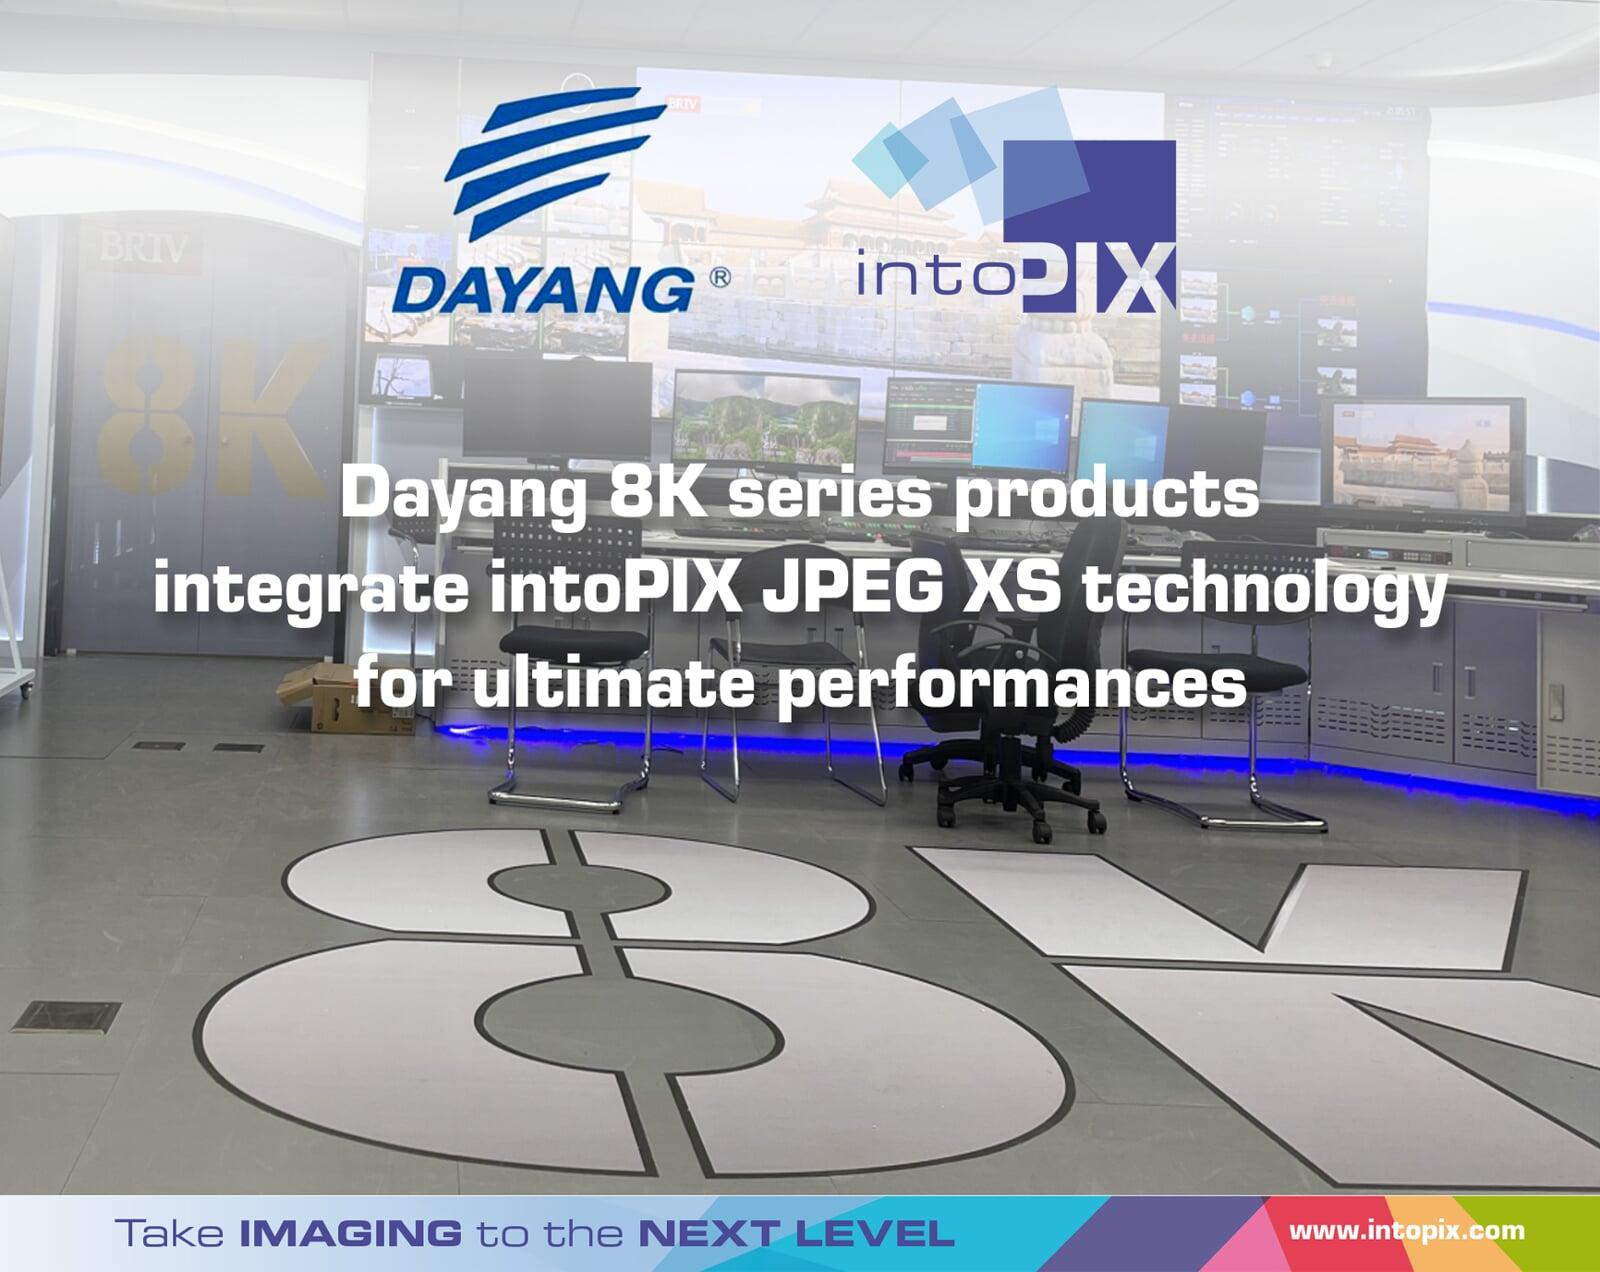 Dayang 8K series products integrate intoPIX JPEG XS technology for ultimate performances